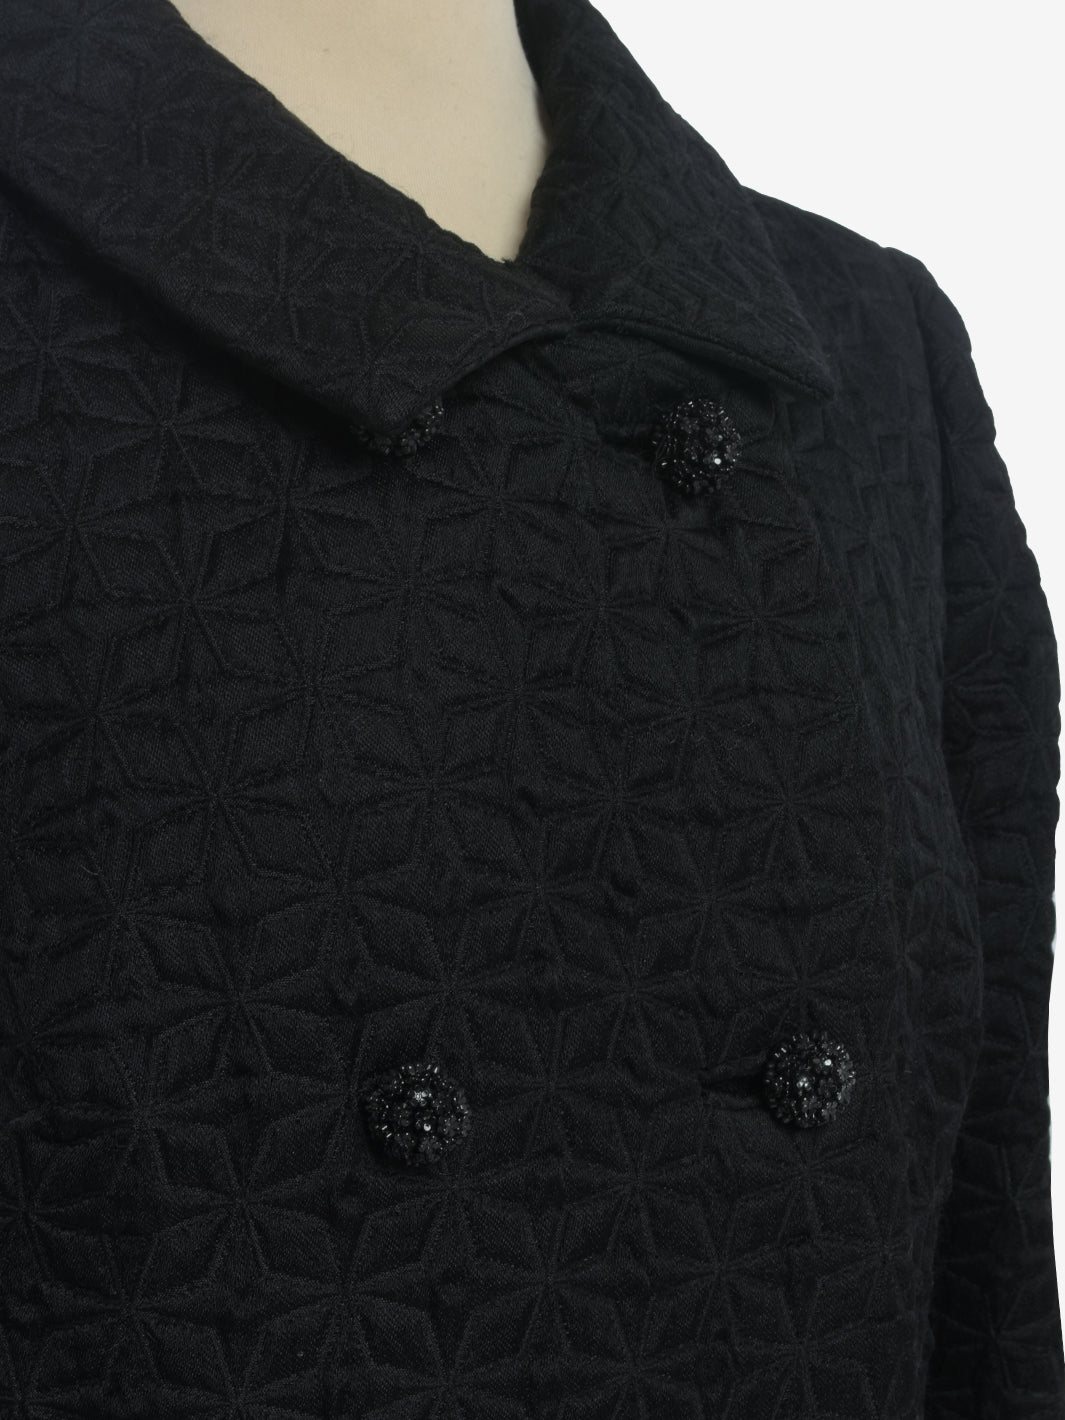 Vintage Coat With Jewel Buttons